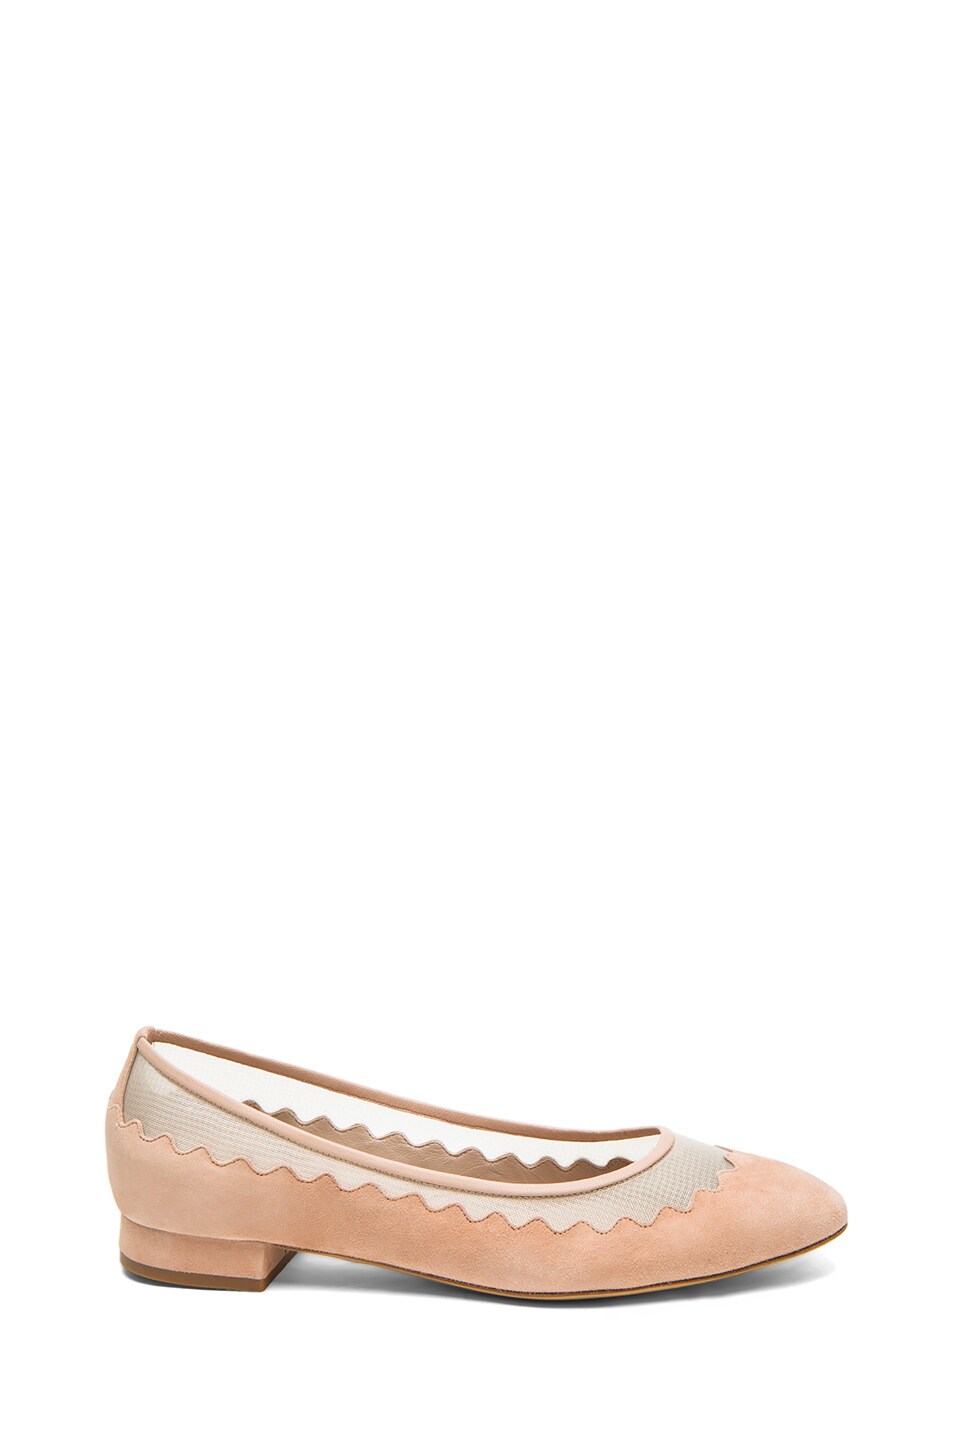 Chloe Suede Scalloped Flats with Mesh in Toulle | FWRD